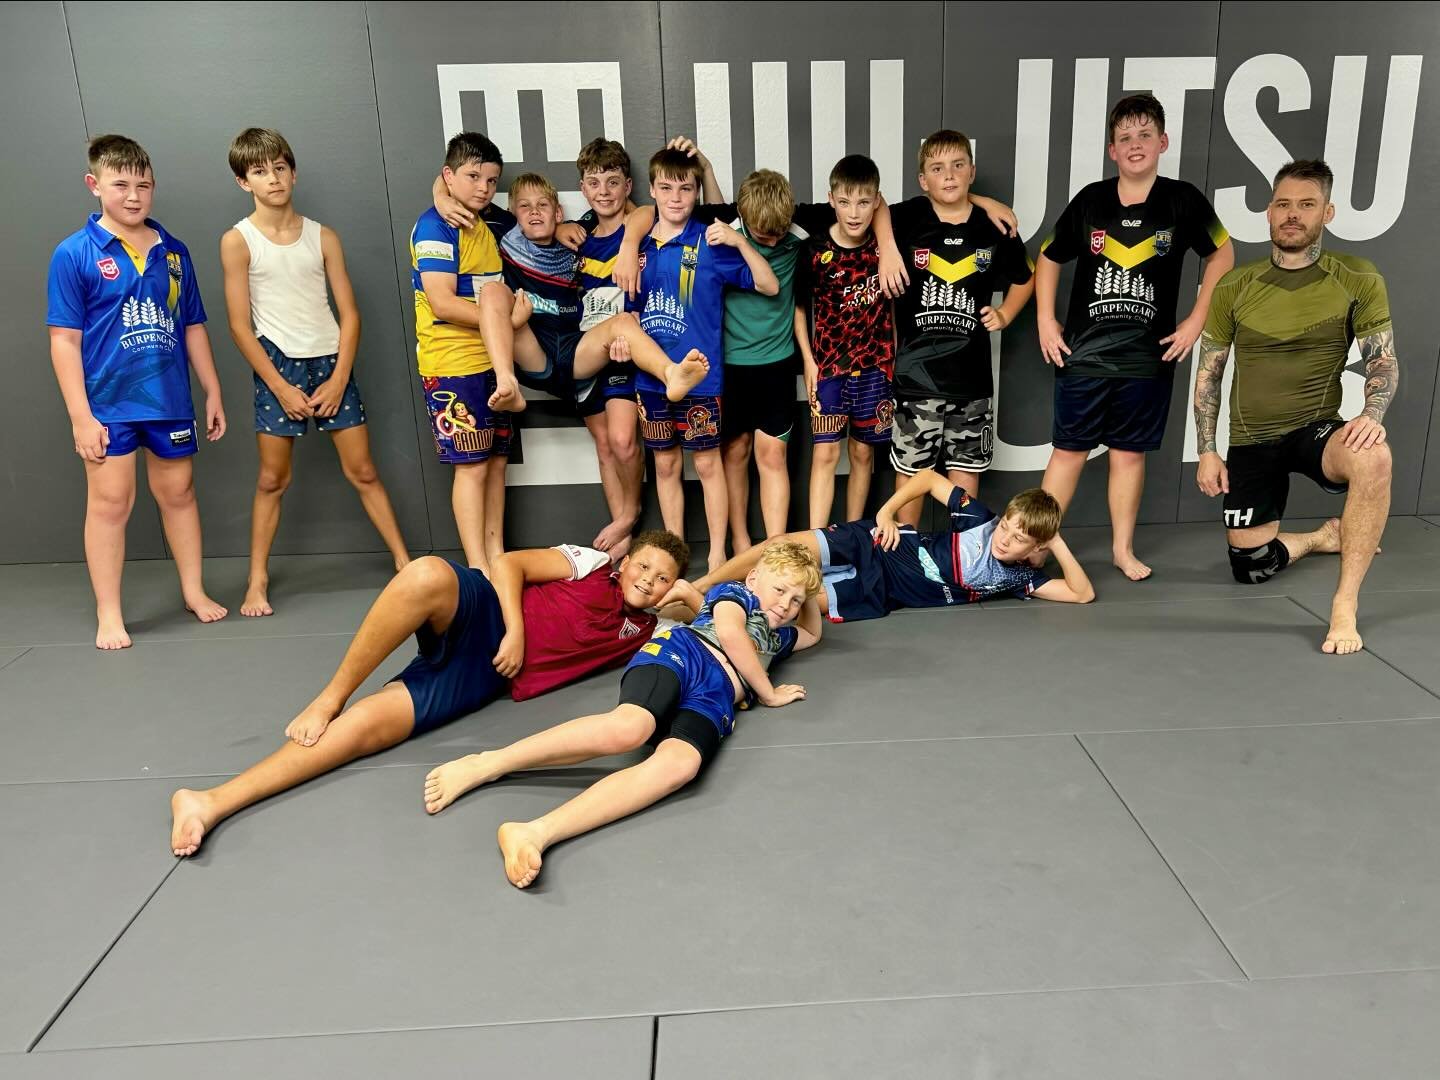 The Burpengary Jets Under 12s Rugby Team (orange) were in tonight getting the edge on their opponents. A wet field doesn&rsquo;t mean the training ends - the kids learned wrestling, take downs &amp; specialised techniques they can apply on the field 